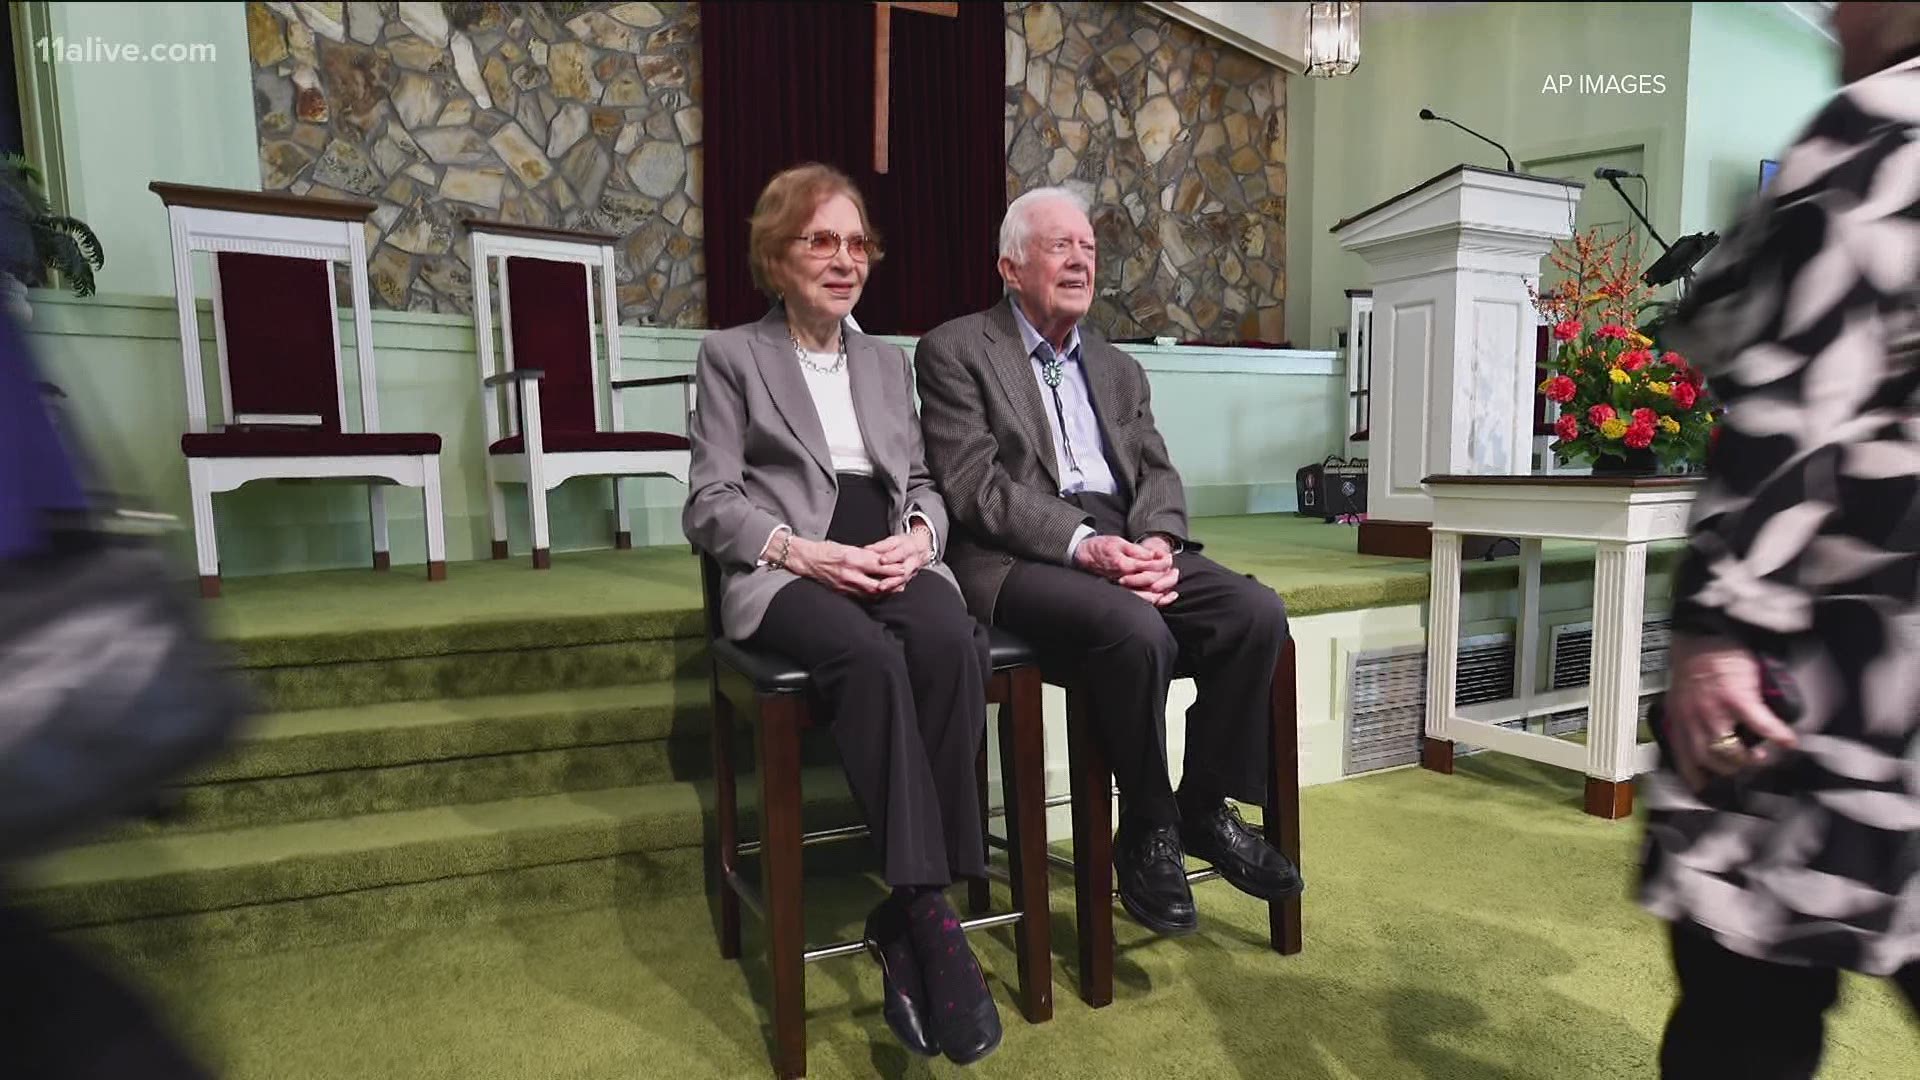 The 96-year-old former president and Rosalynn Carter are again attending worship in person.